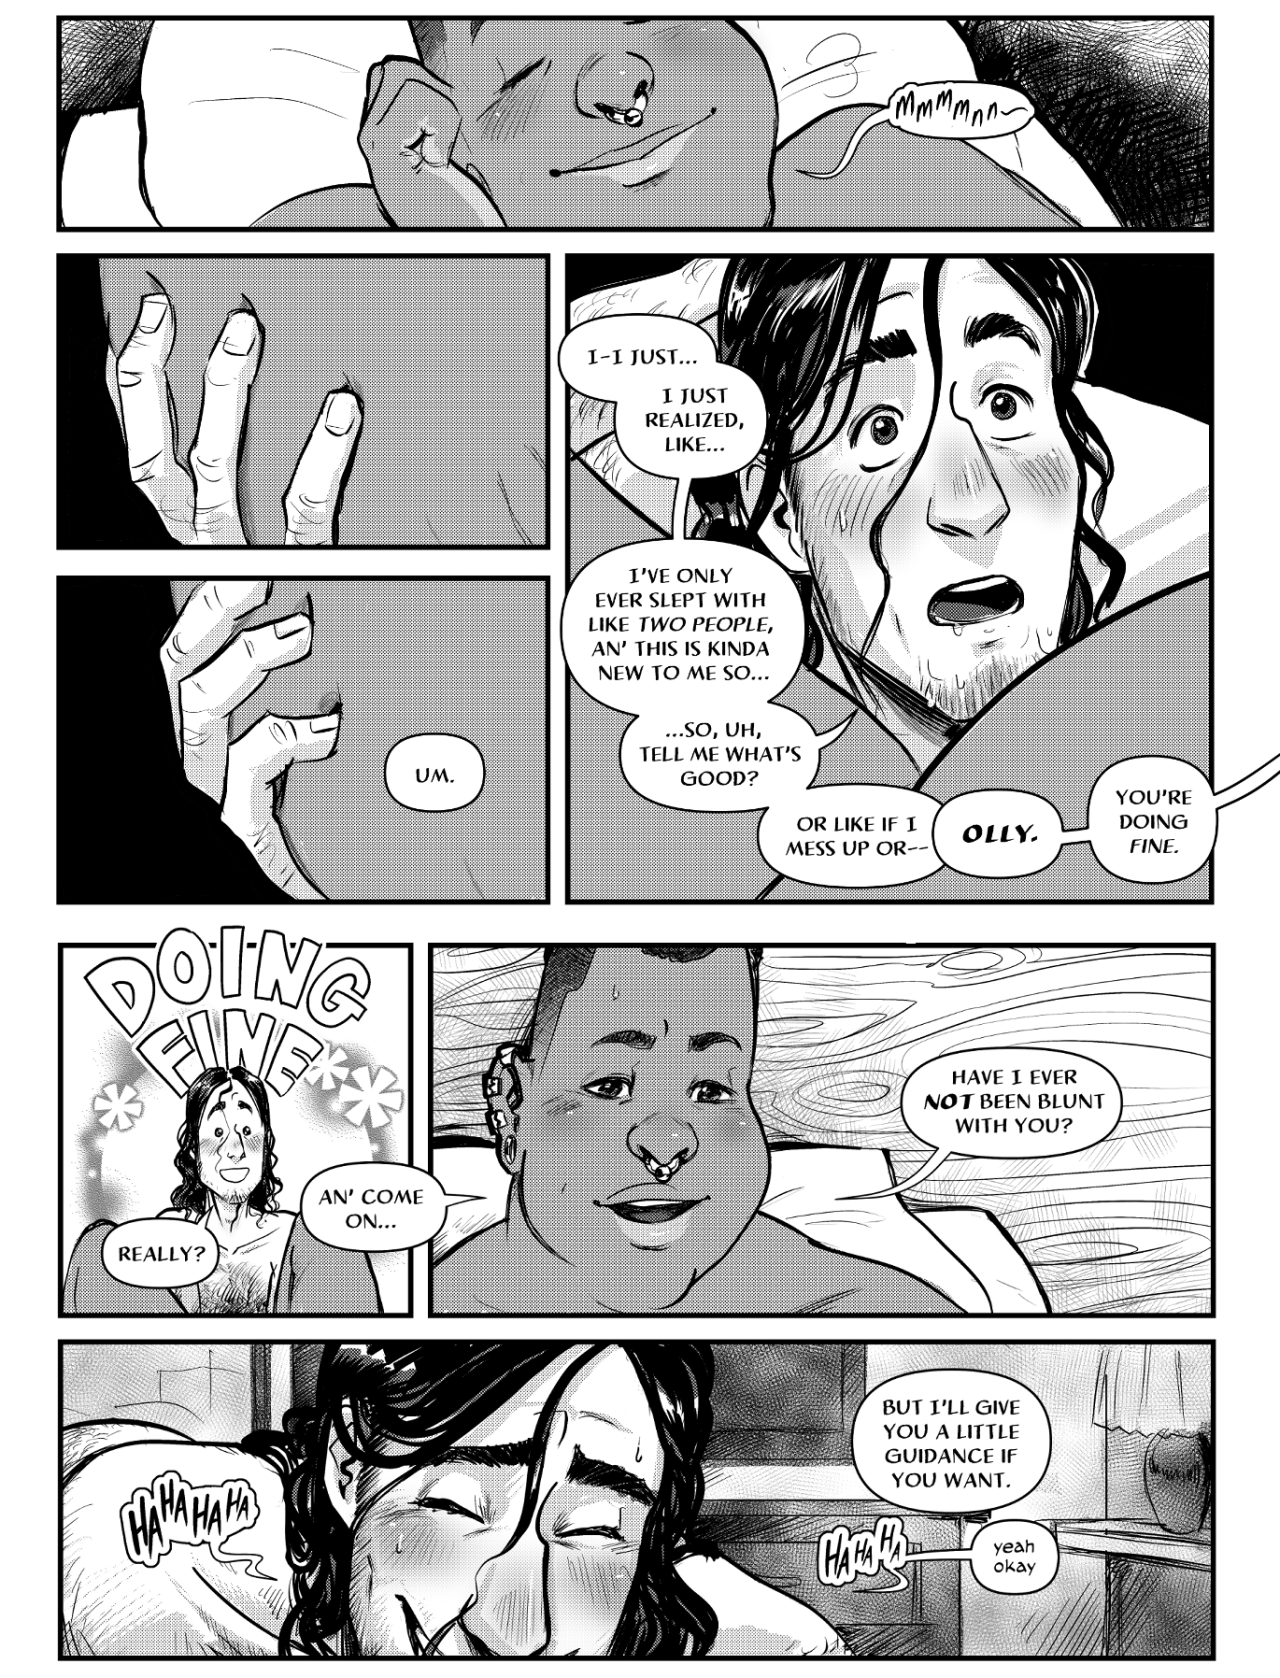 Clementine all to offer porn comic tumblr